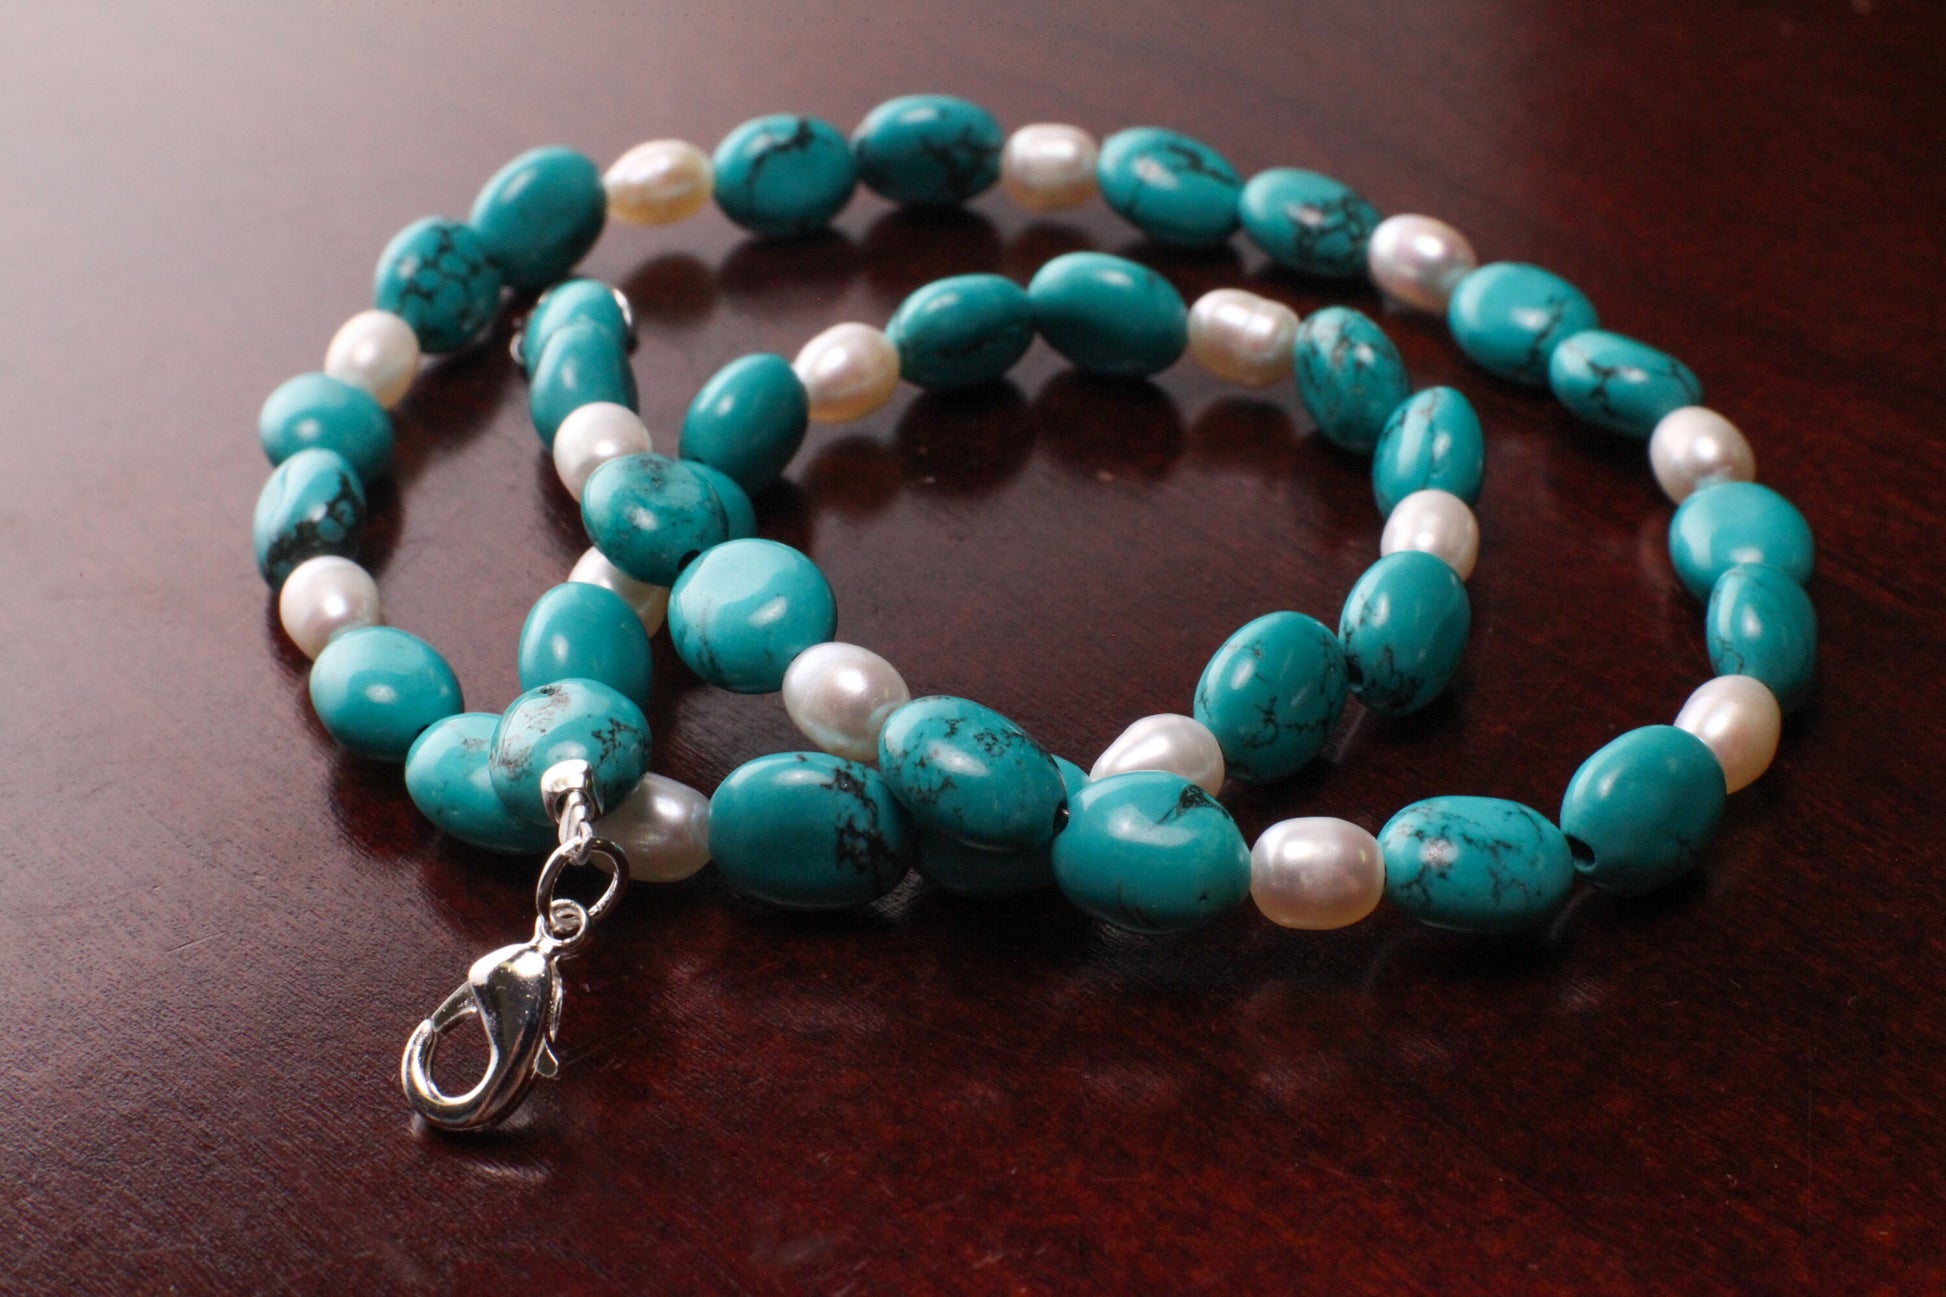 Arizona Blue Turquoise Oval Nugget, Freshwater Pearl Pearl Spacer Silver Necklace